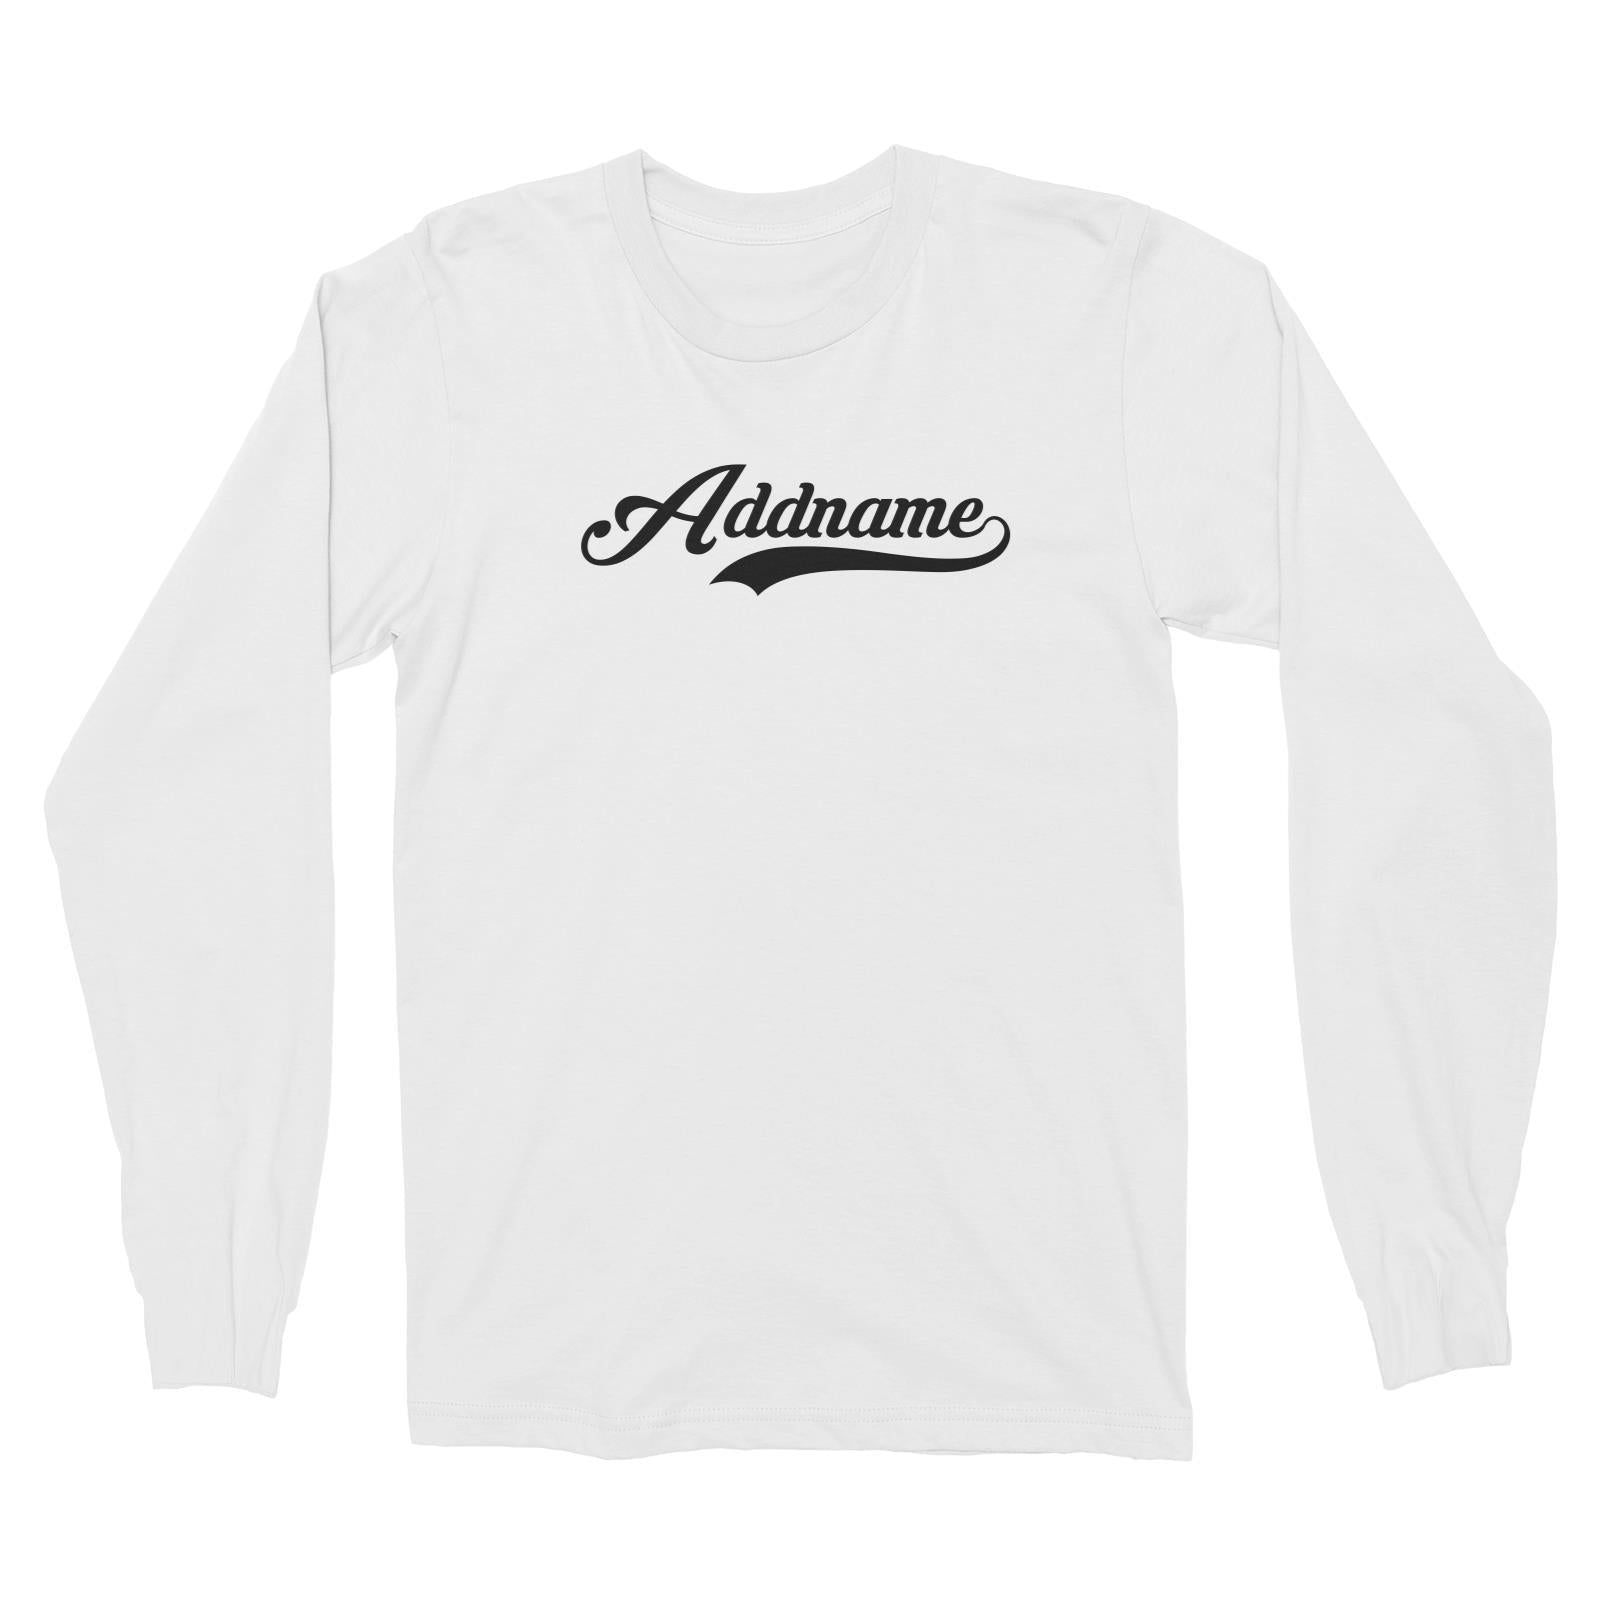 Retro Addname Long Sleeve Unisex T-Shirt  Matching Family Personalizable Designs